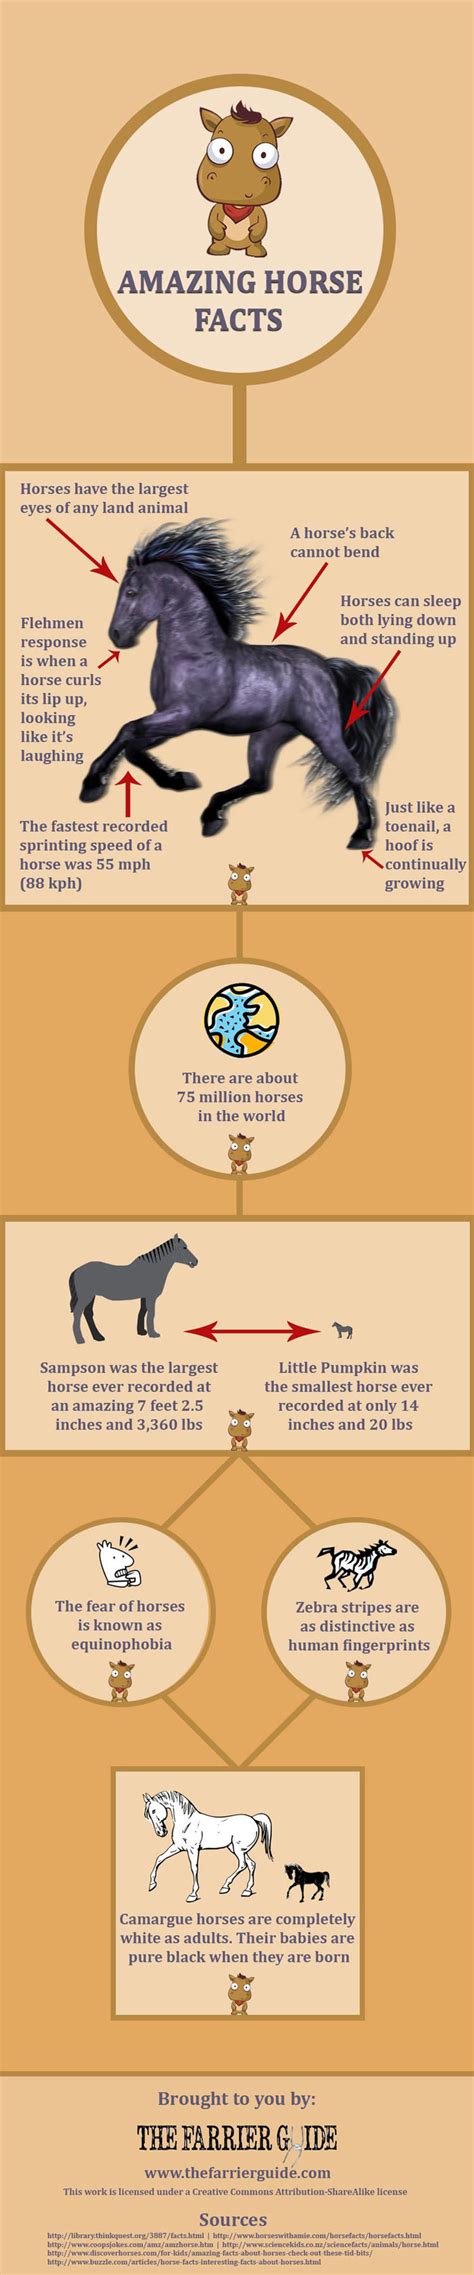 Amazing Horse Facts Infographic The Farrier Guide Images And Photos